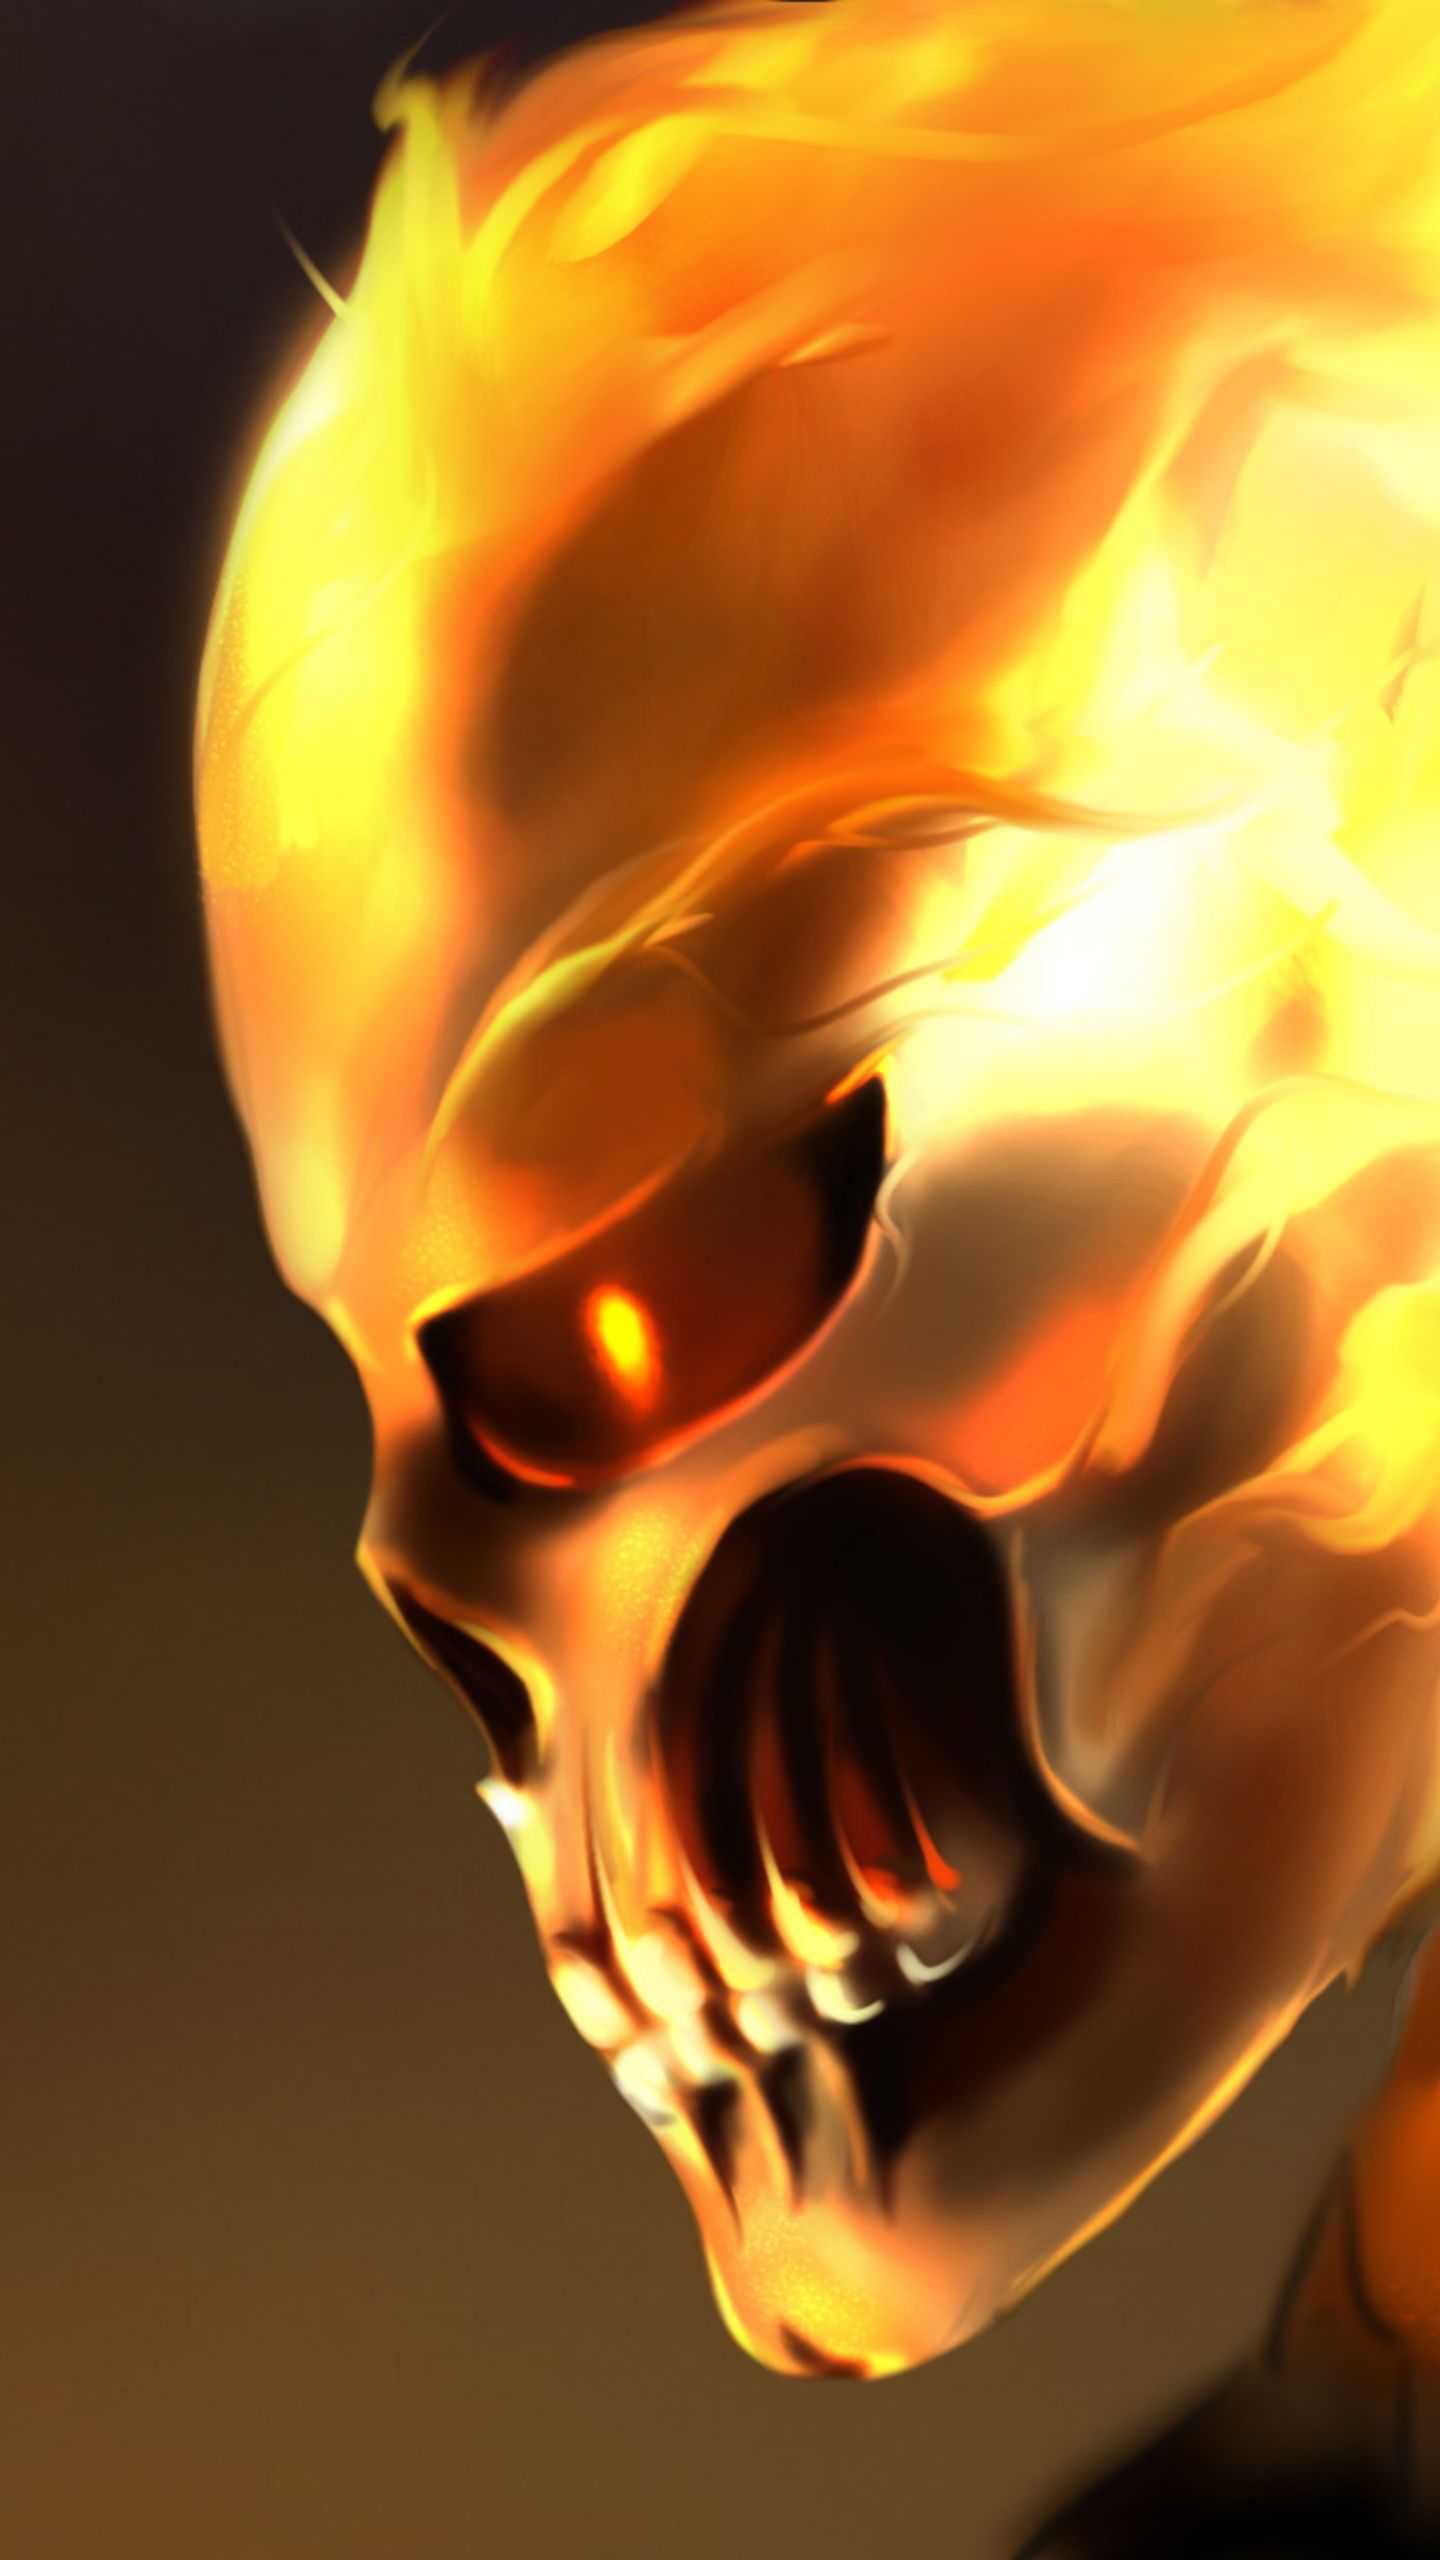 Coolest Ghost Rider 2020 Art Wallpapers